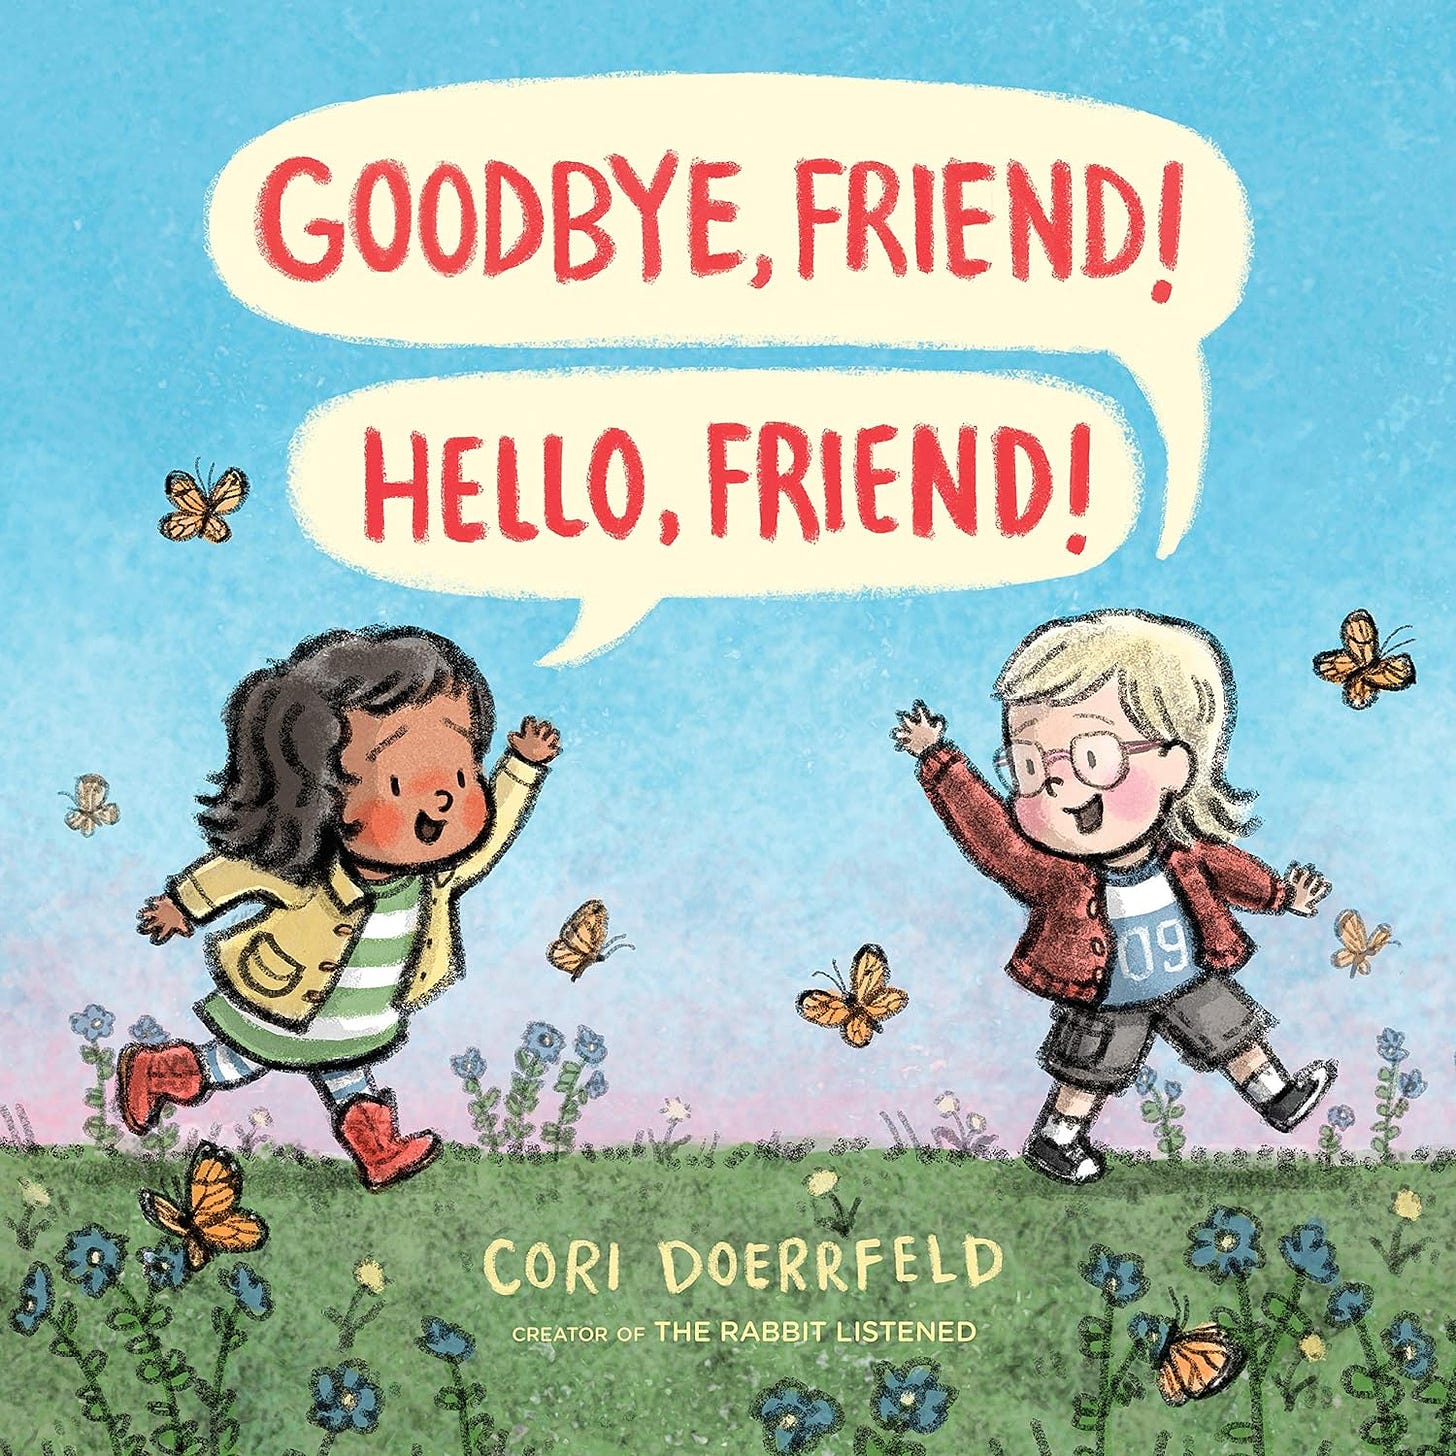 Cover image of Goodbye Friend! Hello Friend!, in which two children are cheerfully waving at each other against a blue sky, walking in grass and flowers.